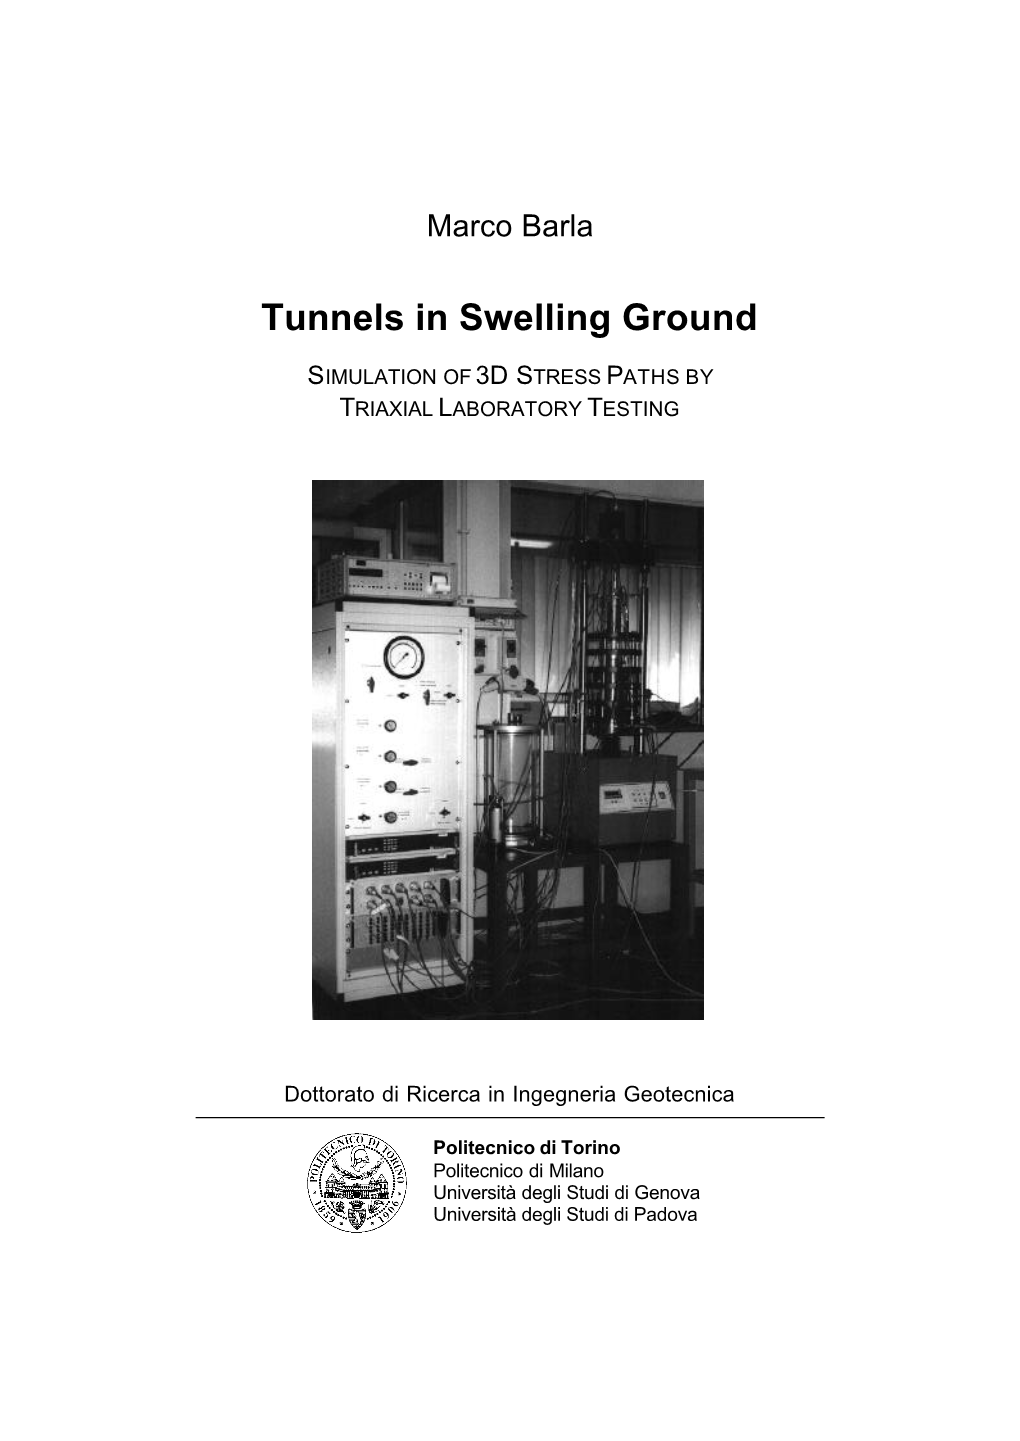 Tunnels in Swelling Ground